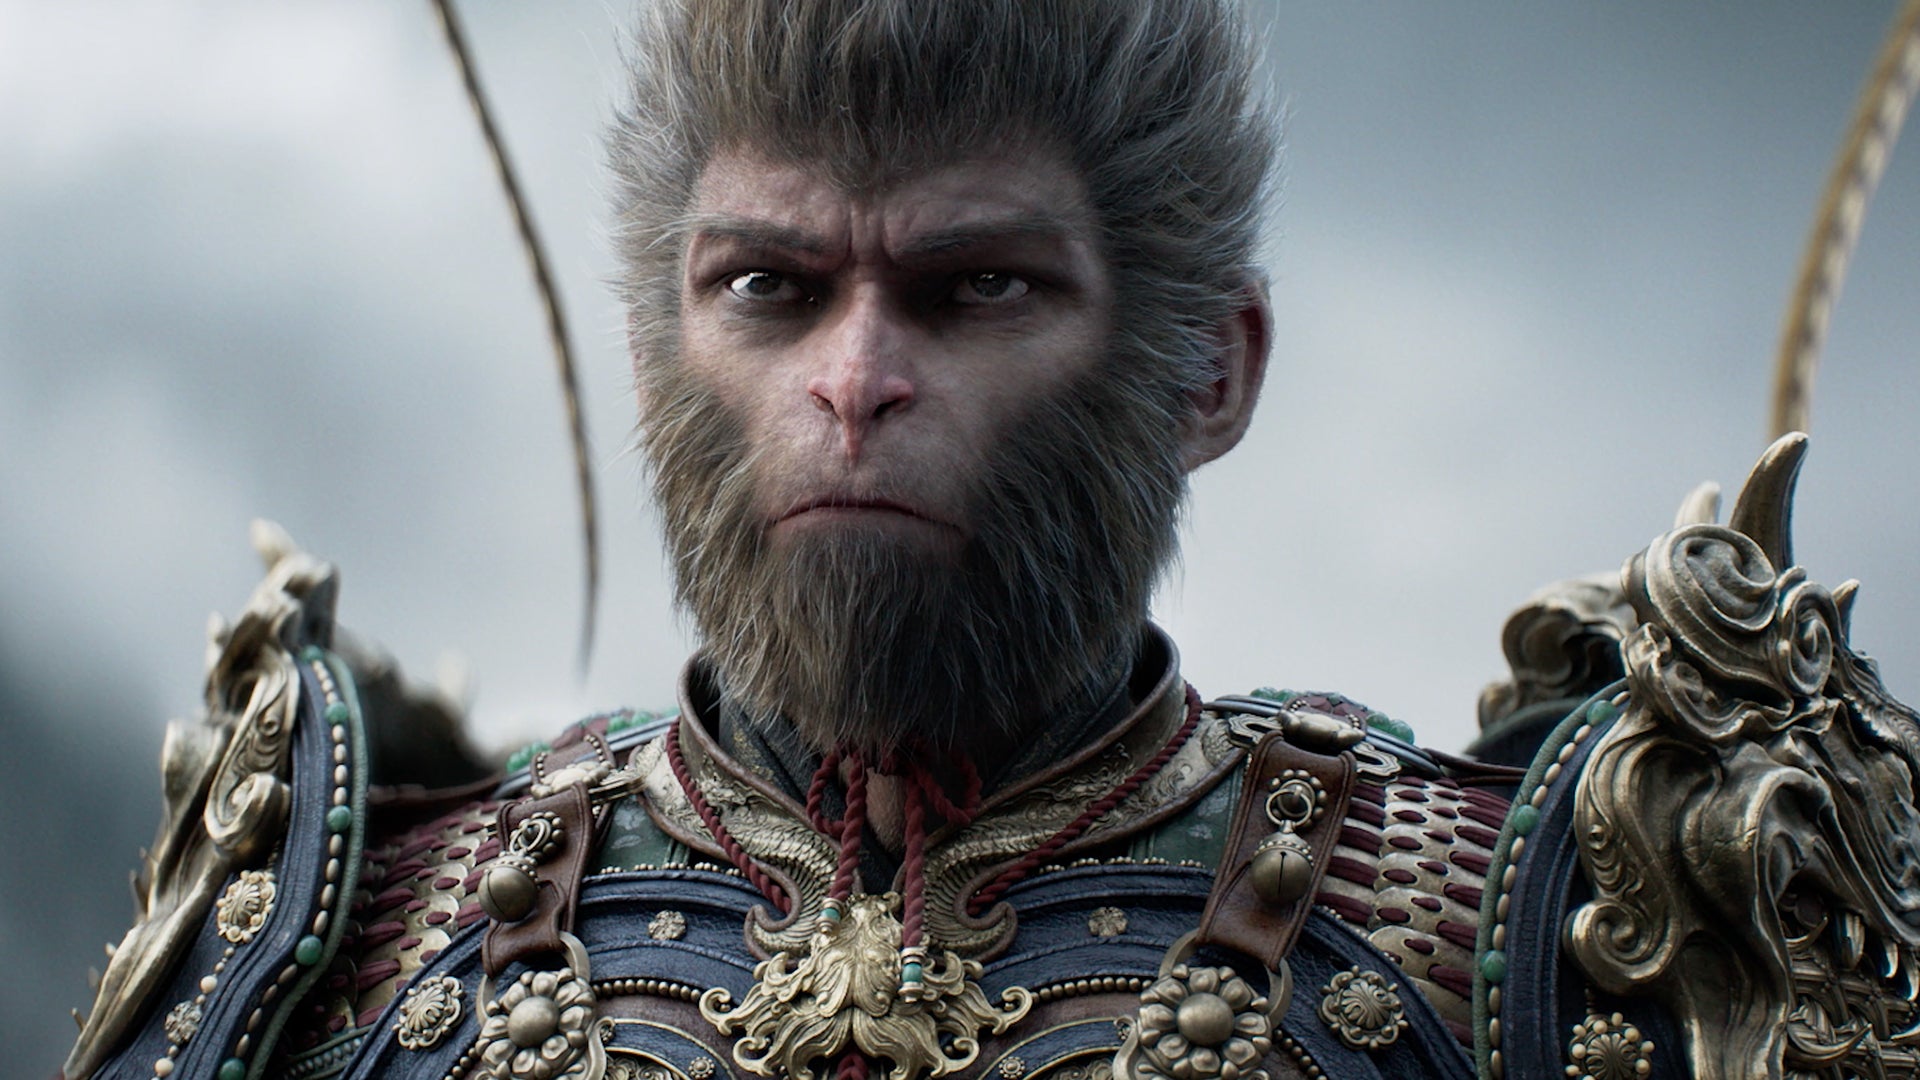 Screenshot from Black Myth: Wukong showing the Monkey King character